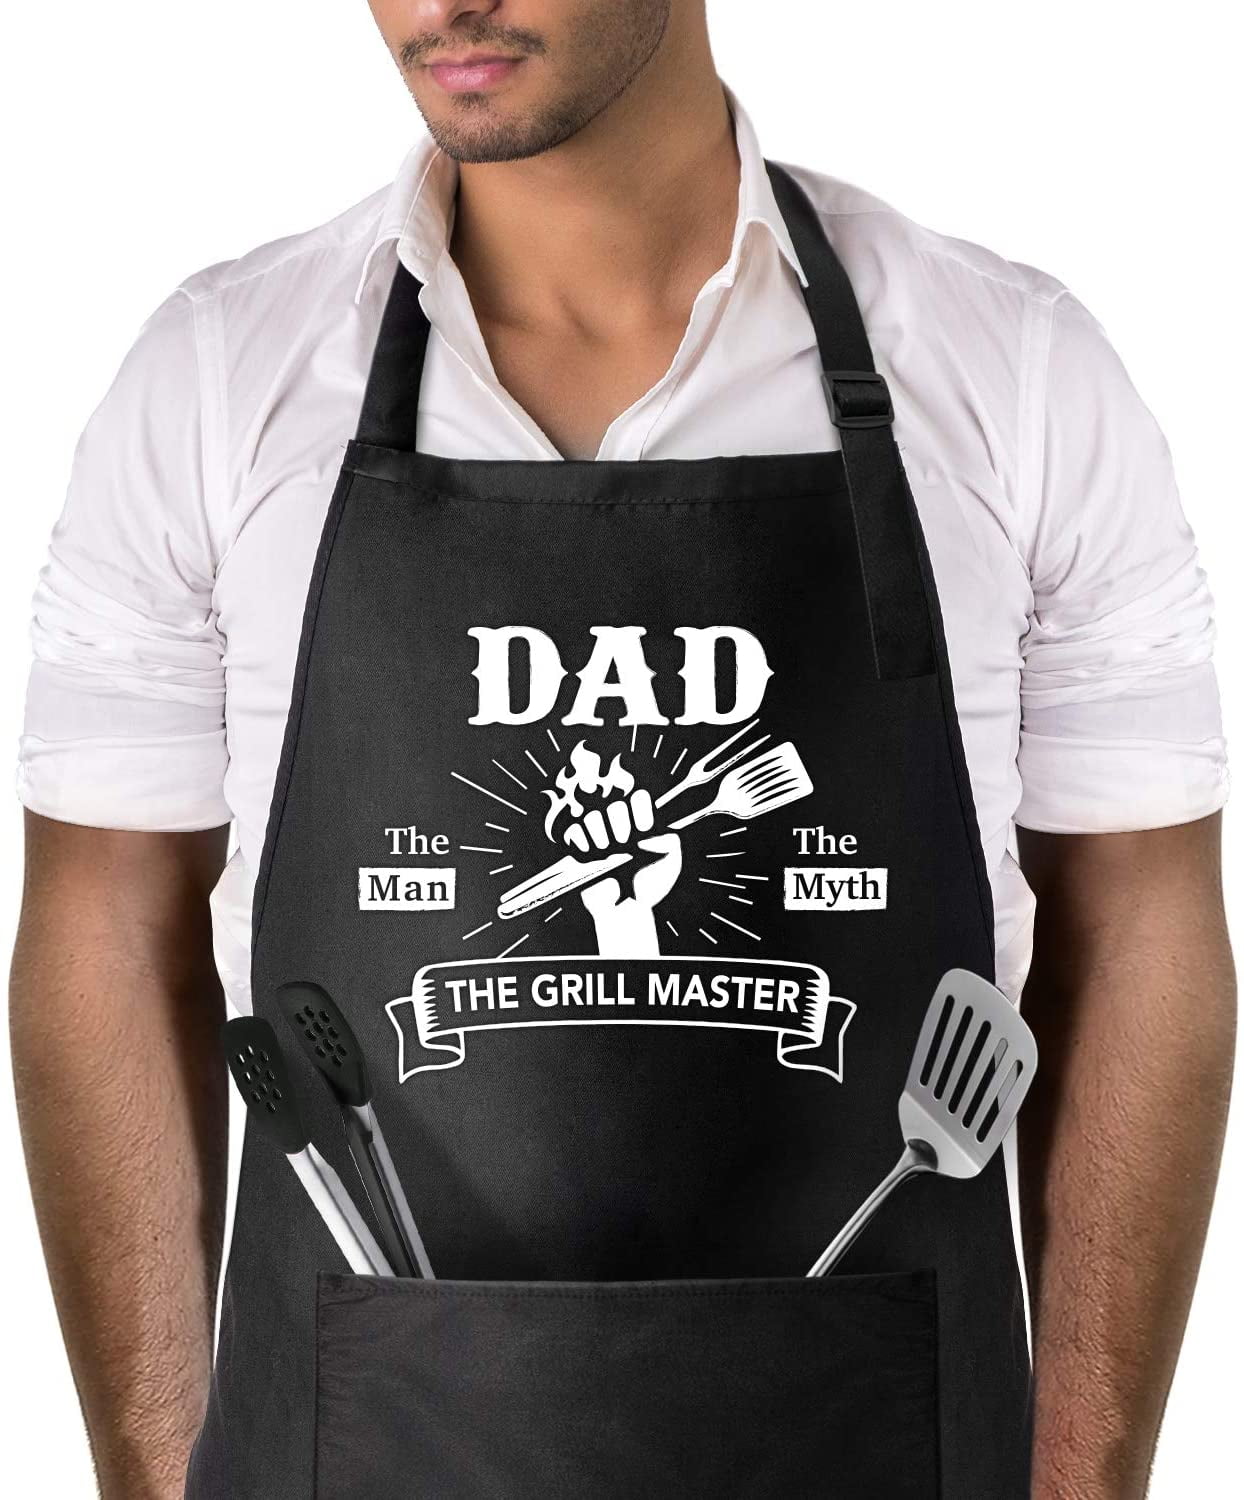 Ougher Cooking Chef Apron for Men, Funny Apron Gifts for Men with 3 Pockets Adjustable Neck Strap Grilling Kitchen BBQ Dad Apron-Birthday Christmas